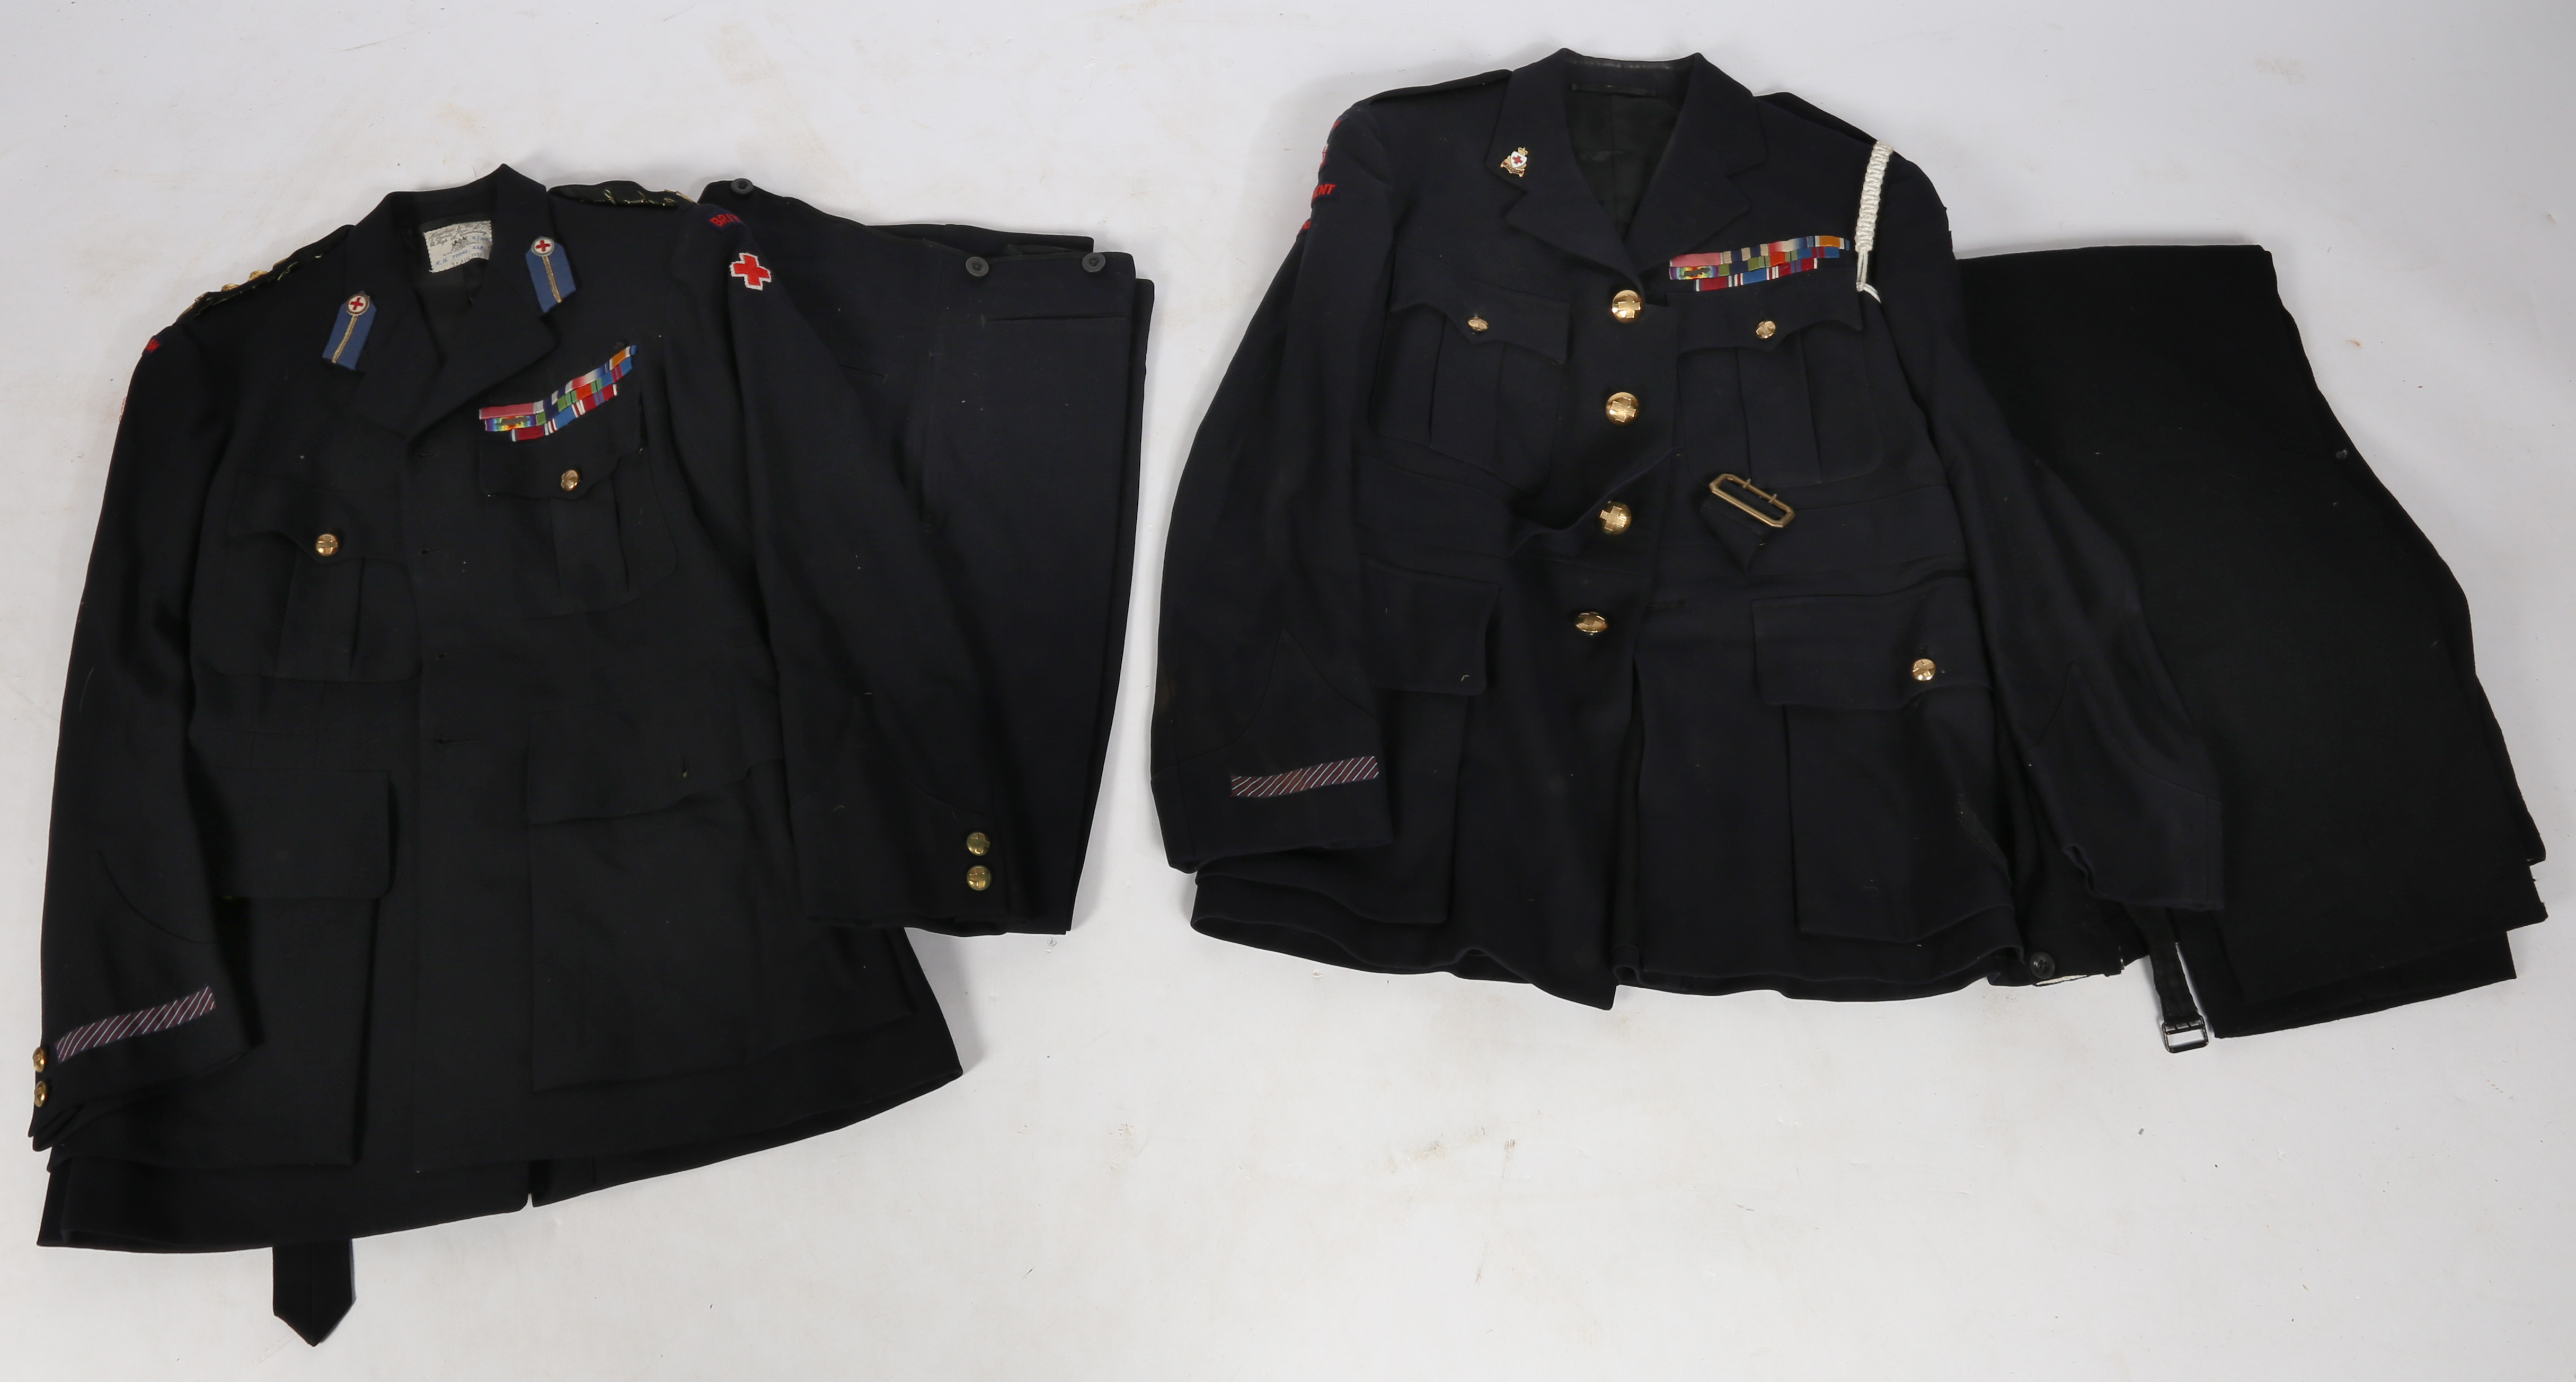 Grouping of British Red Cross uniforms, Jacket and Trousers, British Red Cross buttons